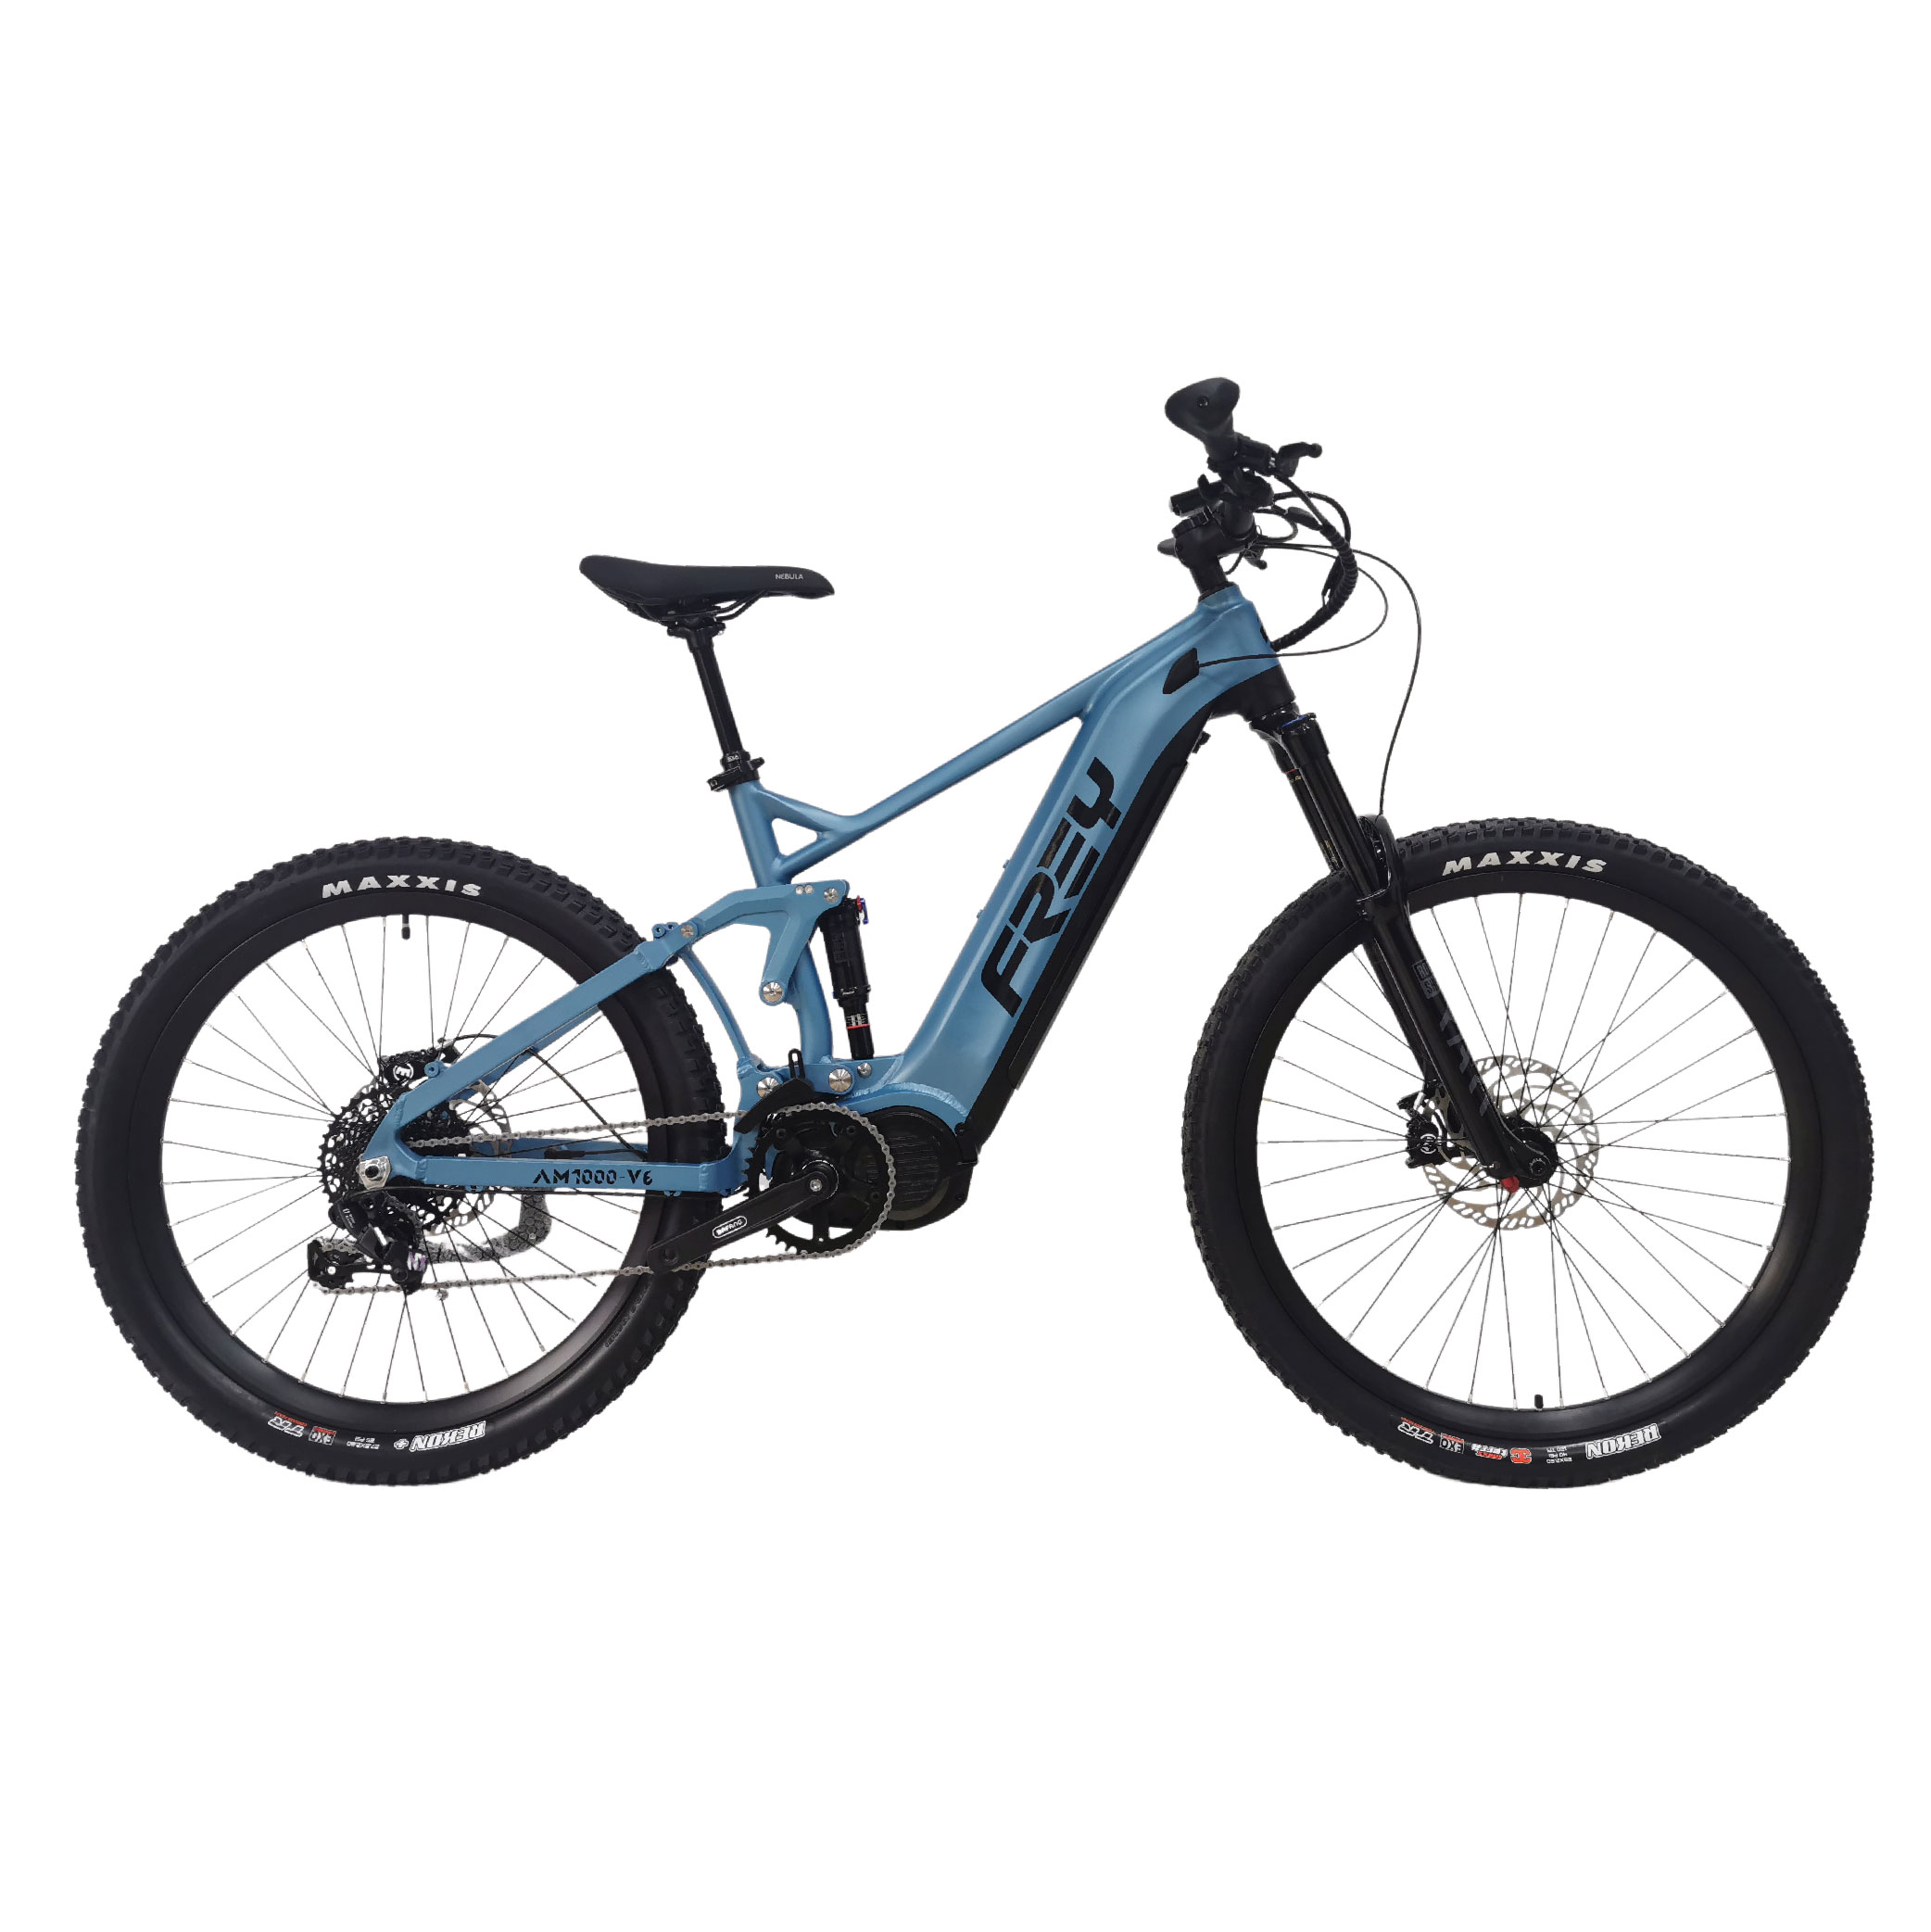 E-mtb full suspension 27.5” electric bicycle